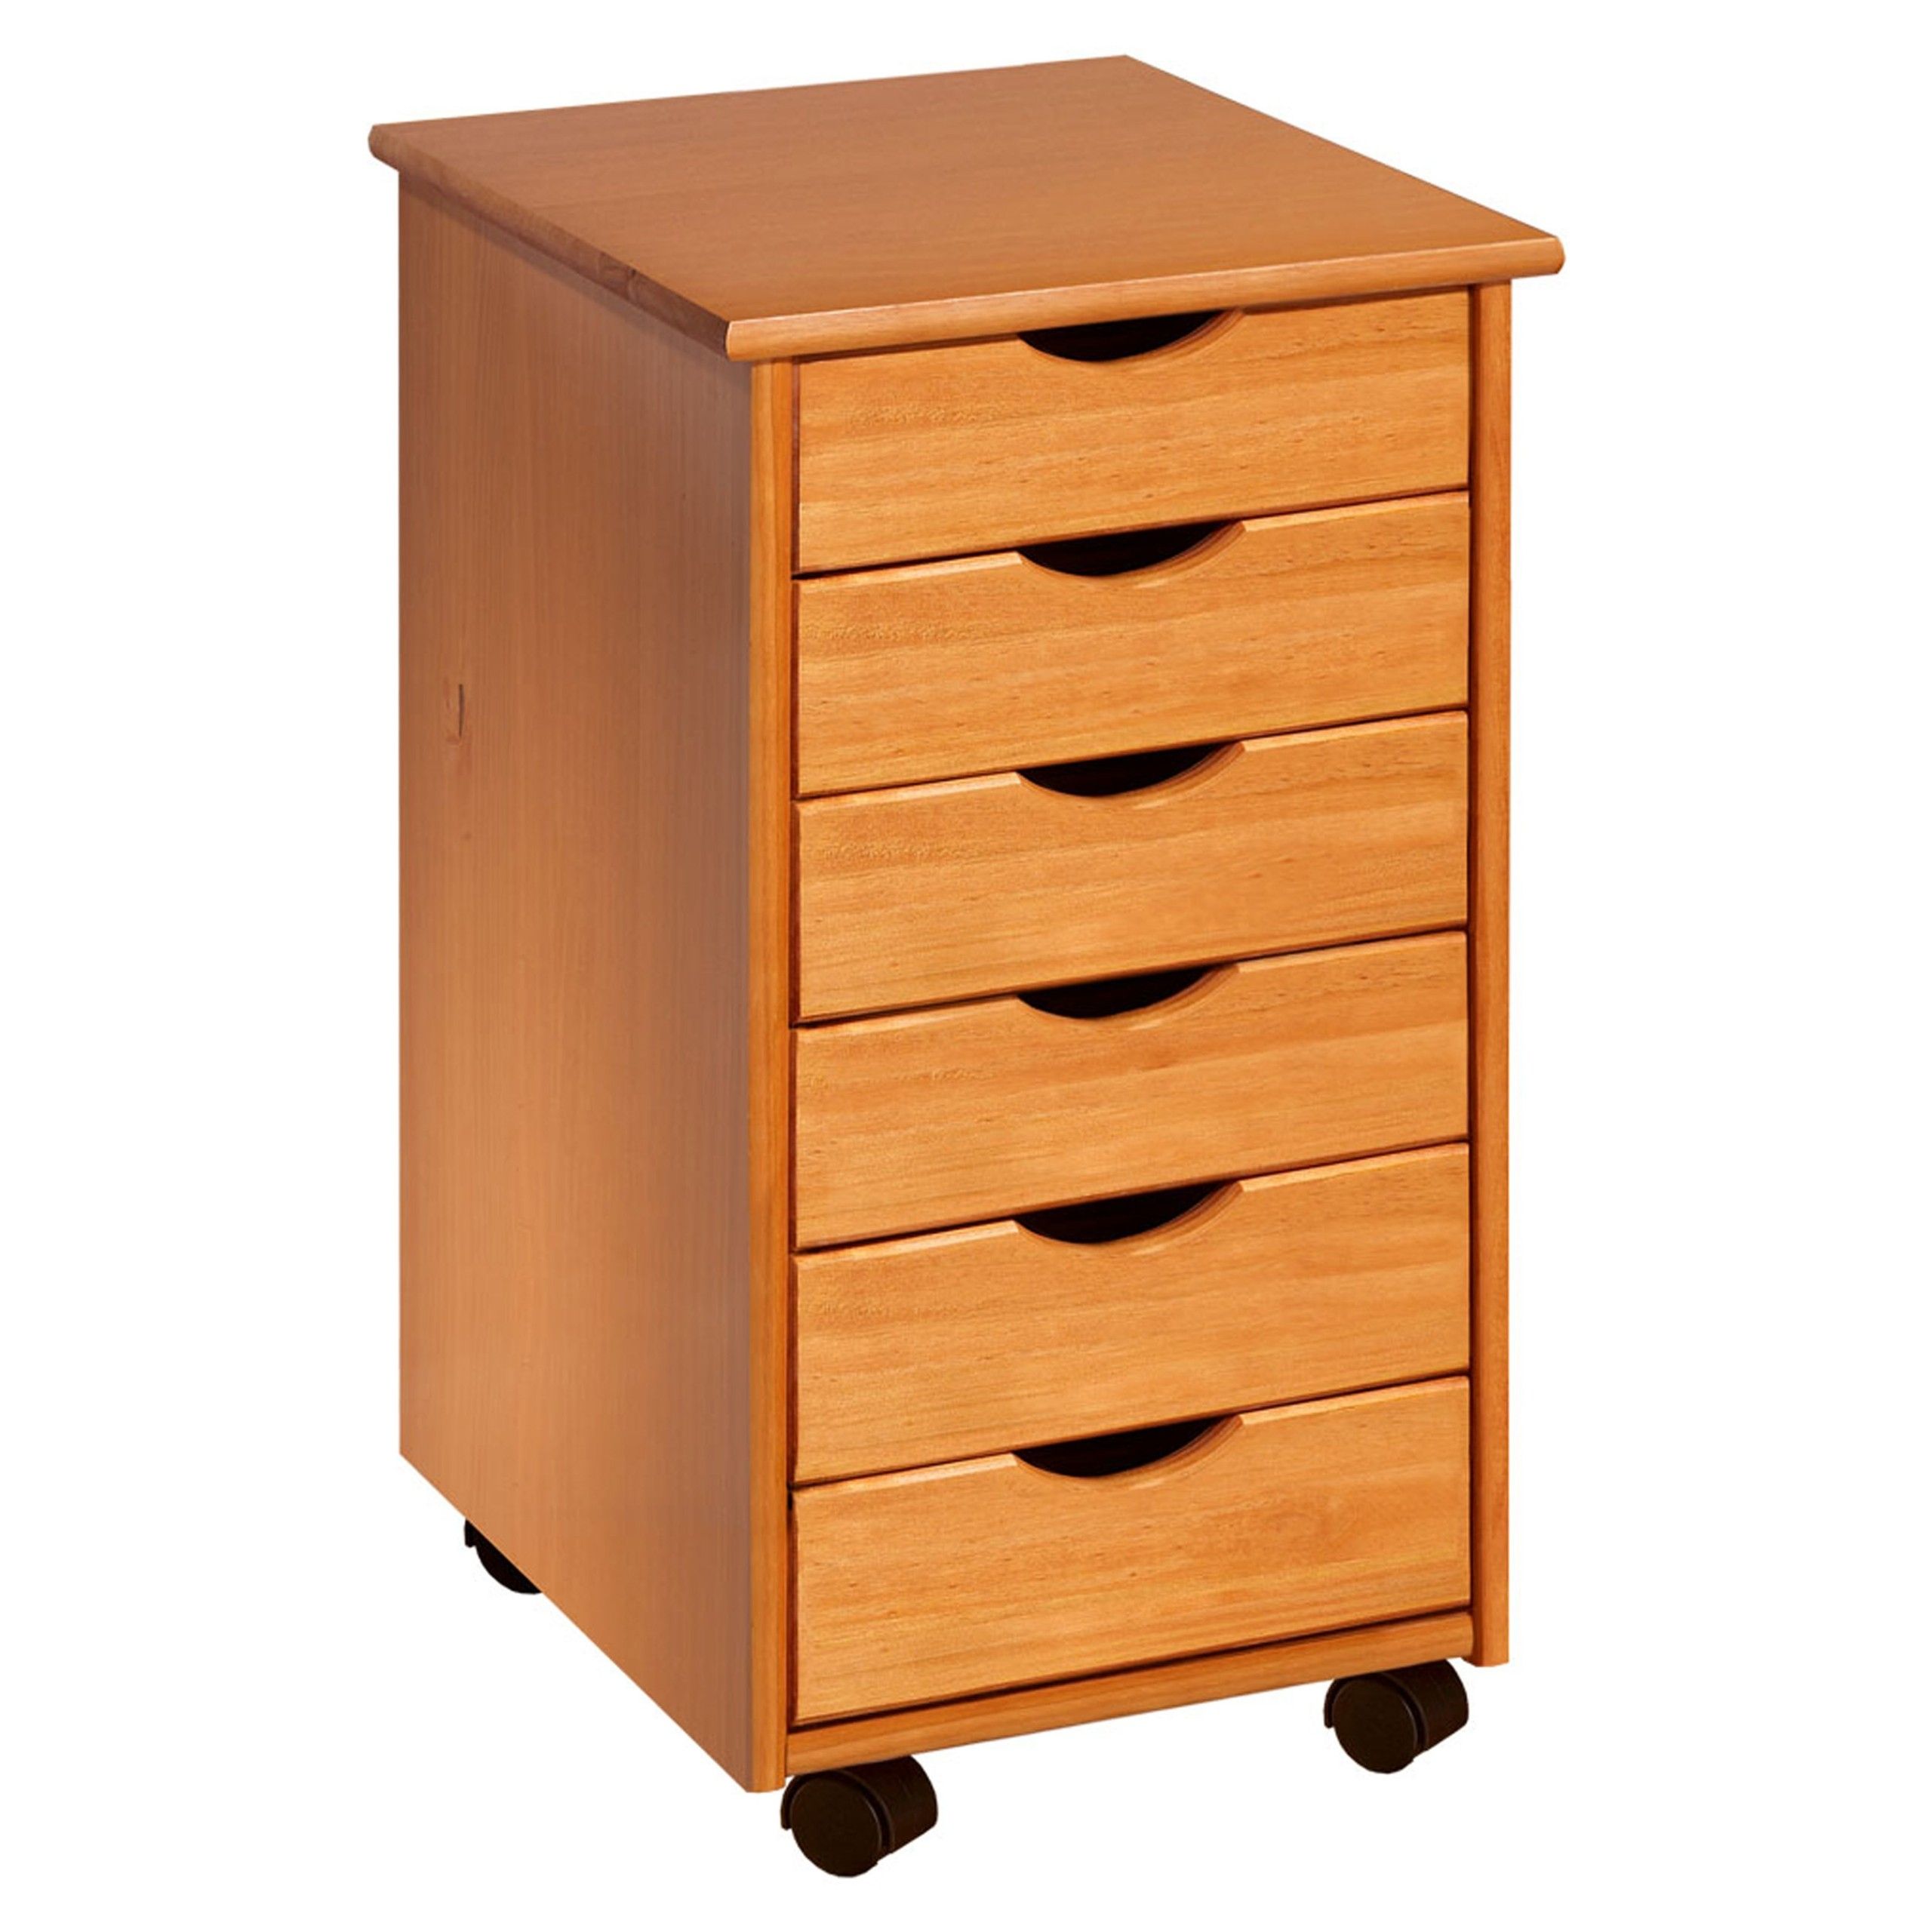 Wood Storage Cabinet With Drawers – Foter For Wood Cabinet With Drawers (View 7 of 20)